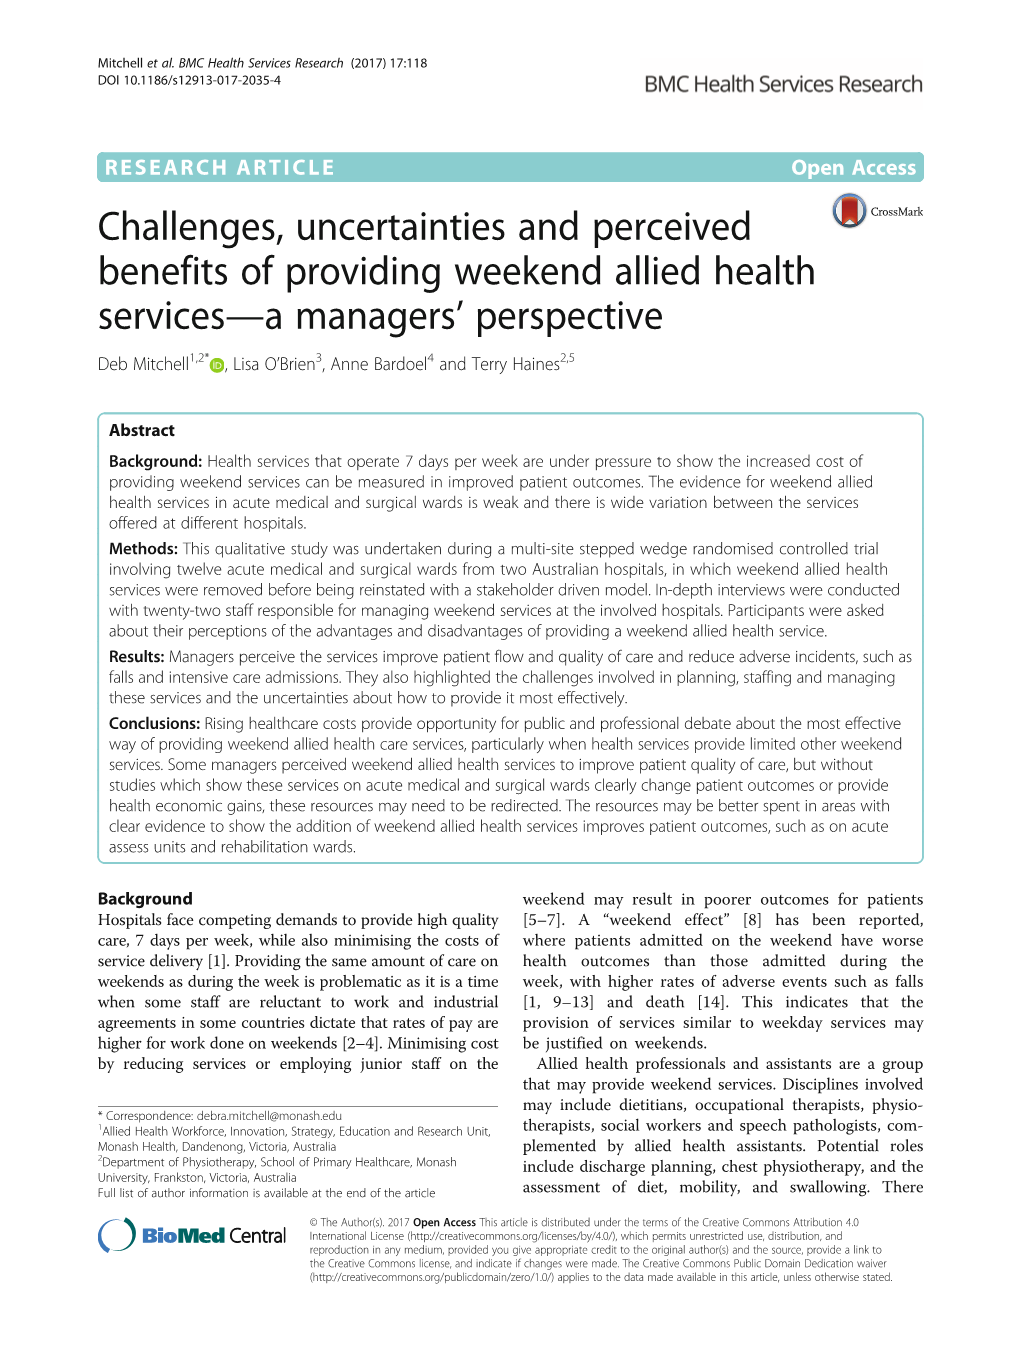 Challenges, Uncertainties and Perceived Benefits of Providing